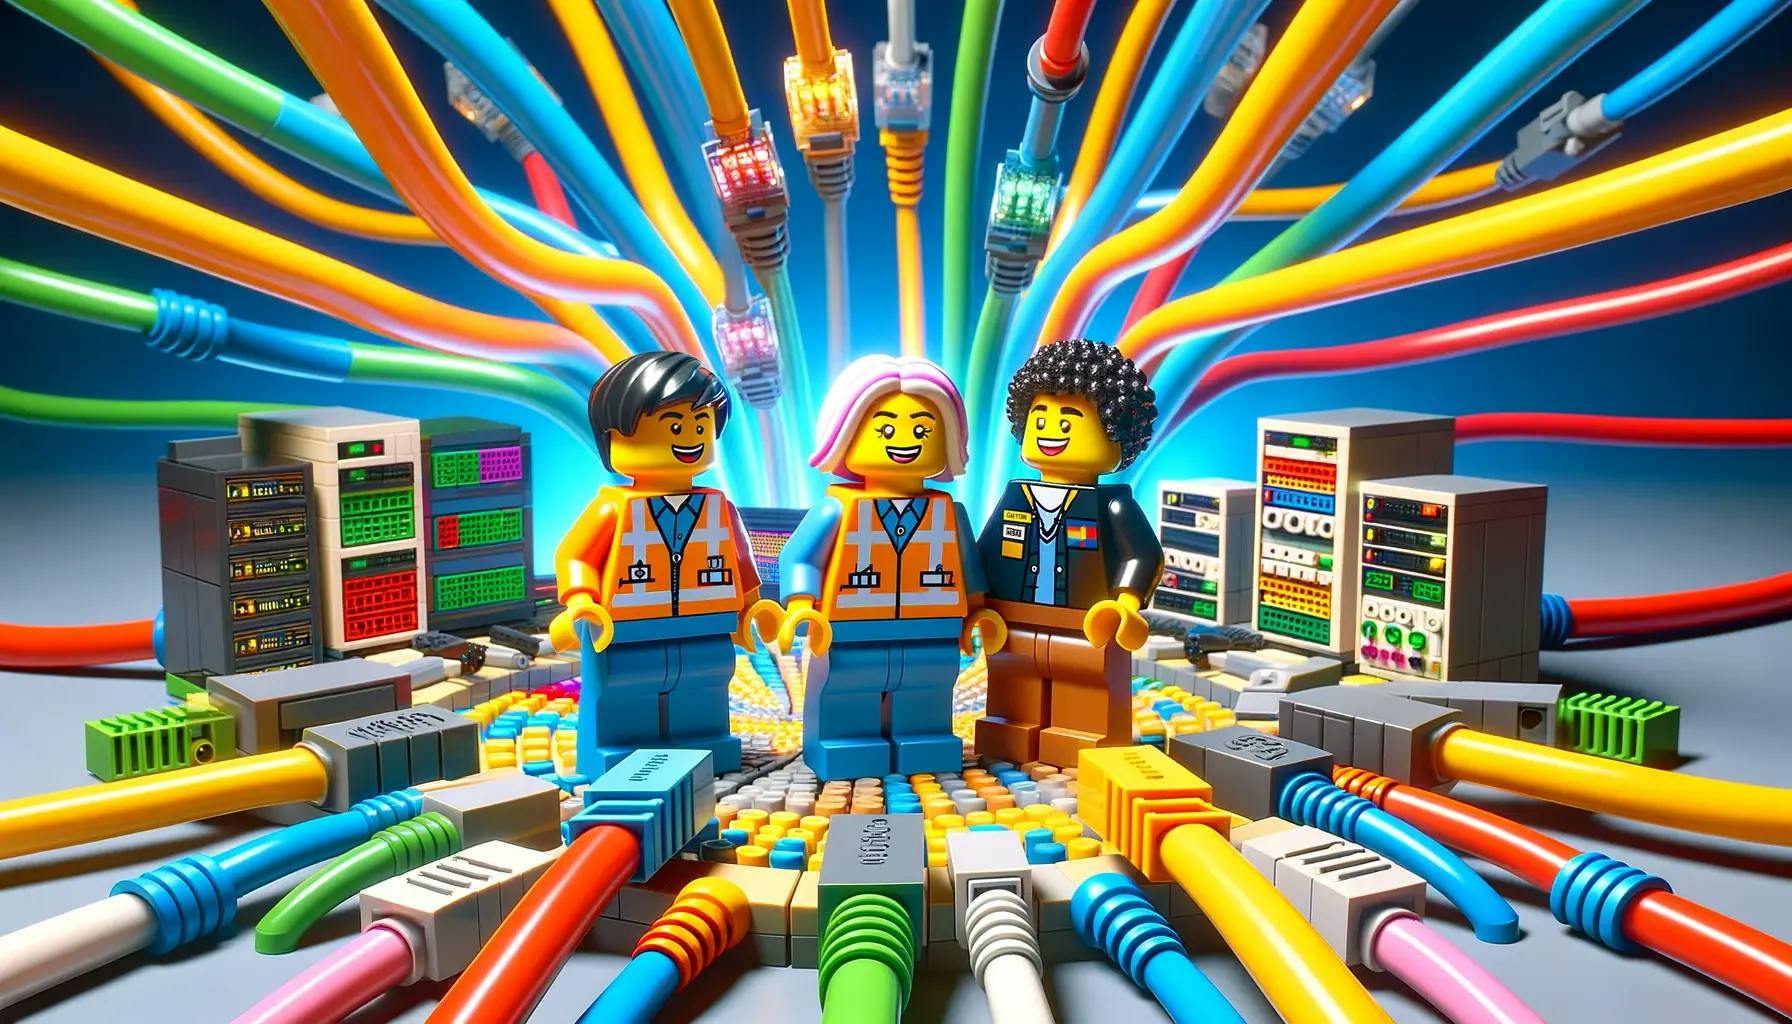 An image depicting many cables and connections coming together to form the connectivity within cloud, with 3 lego type network engineers looking happy.